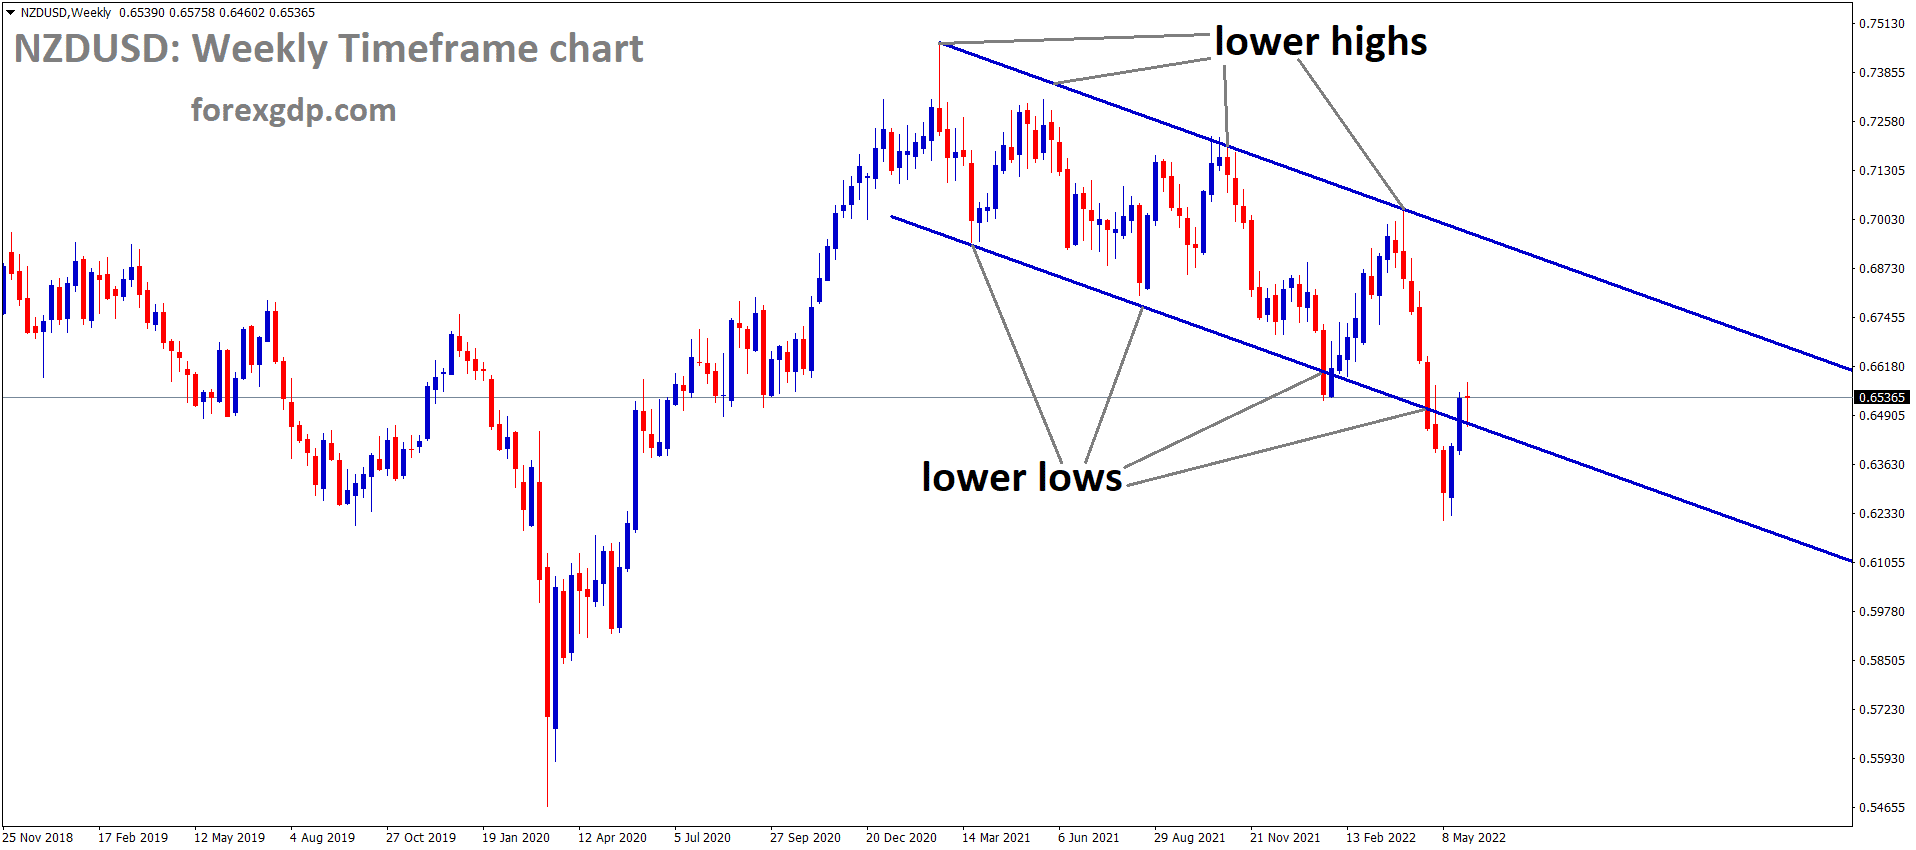 NZDUSD Weekly Time Frame Analysis Market is moving in the Descending channel and the Market has rebounded from the Lower low area of the channel